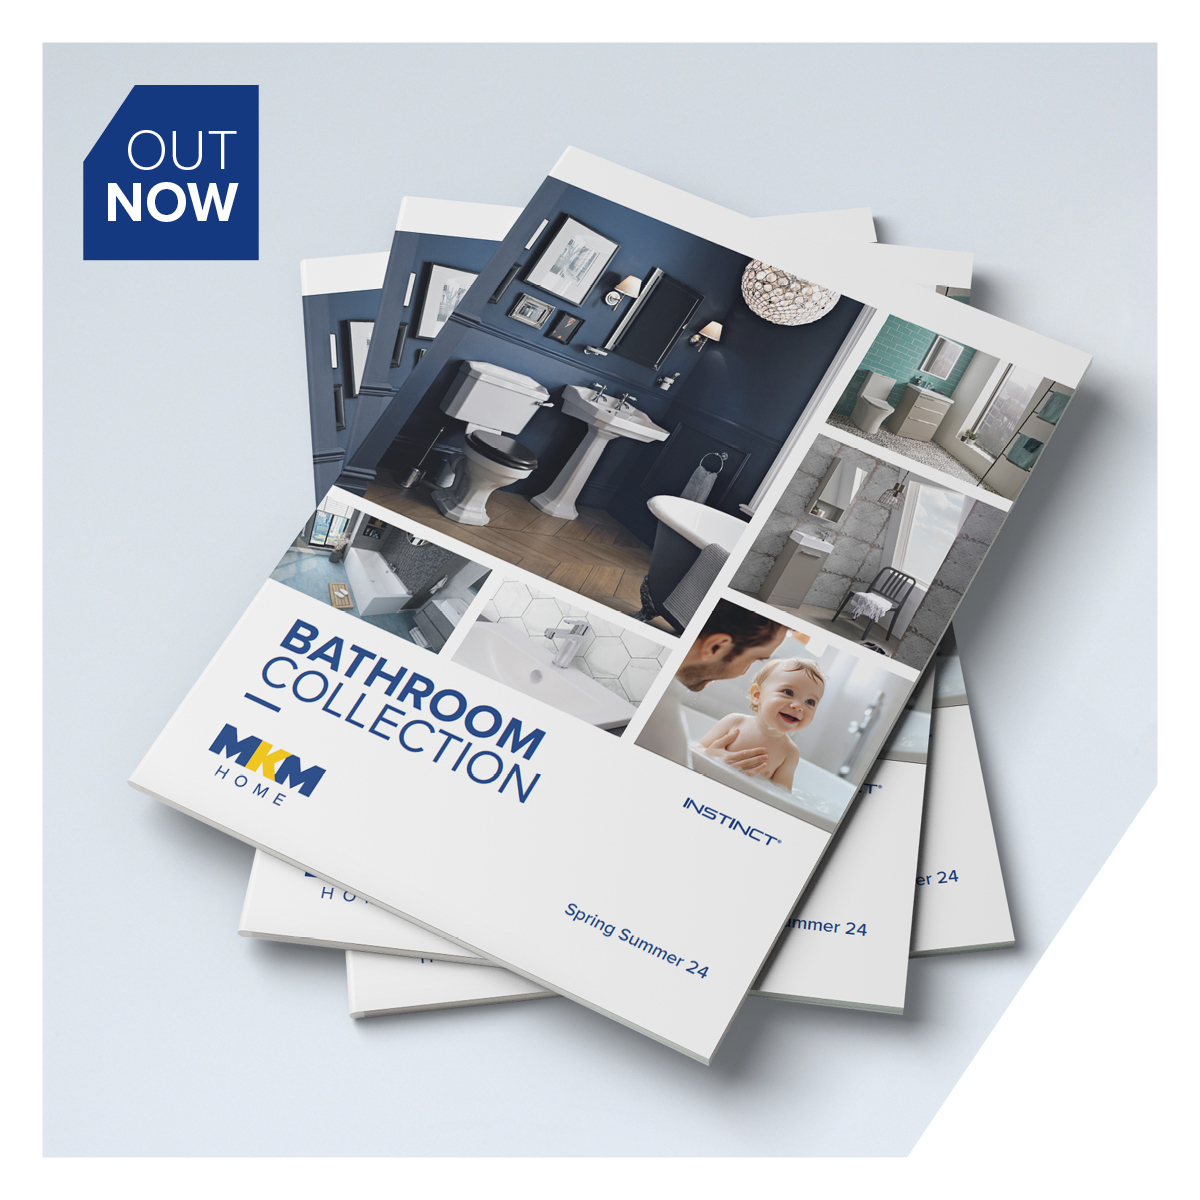 Need our bathroom brochure for your customers? Get a set ordered today for FREE 👇 mkm.bs/3HNUaNn